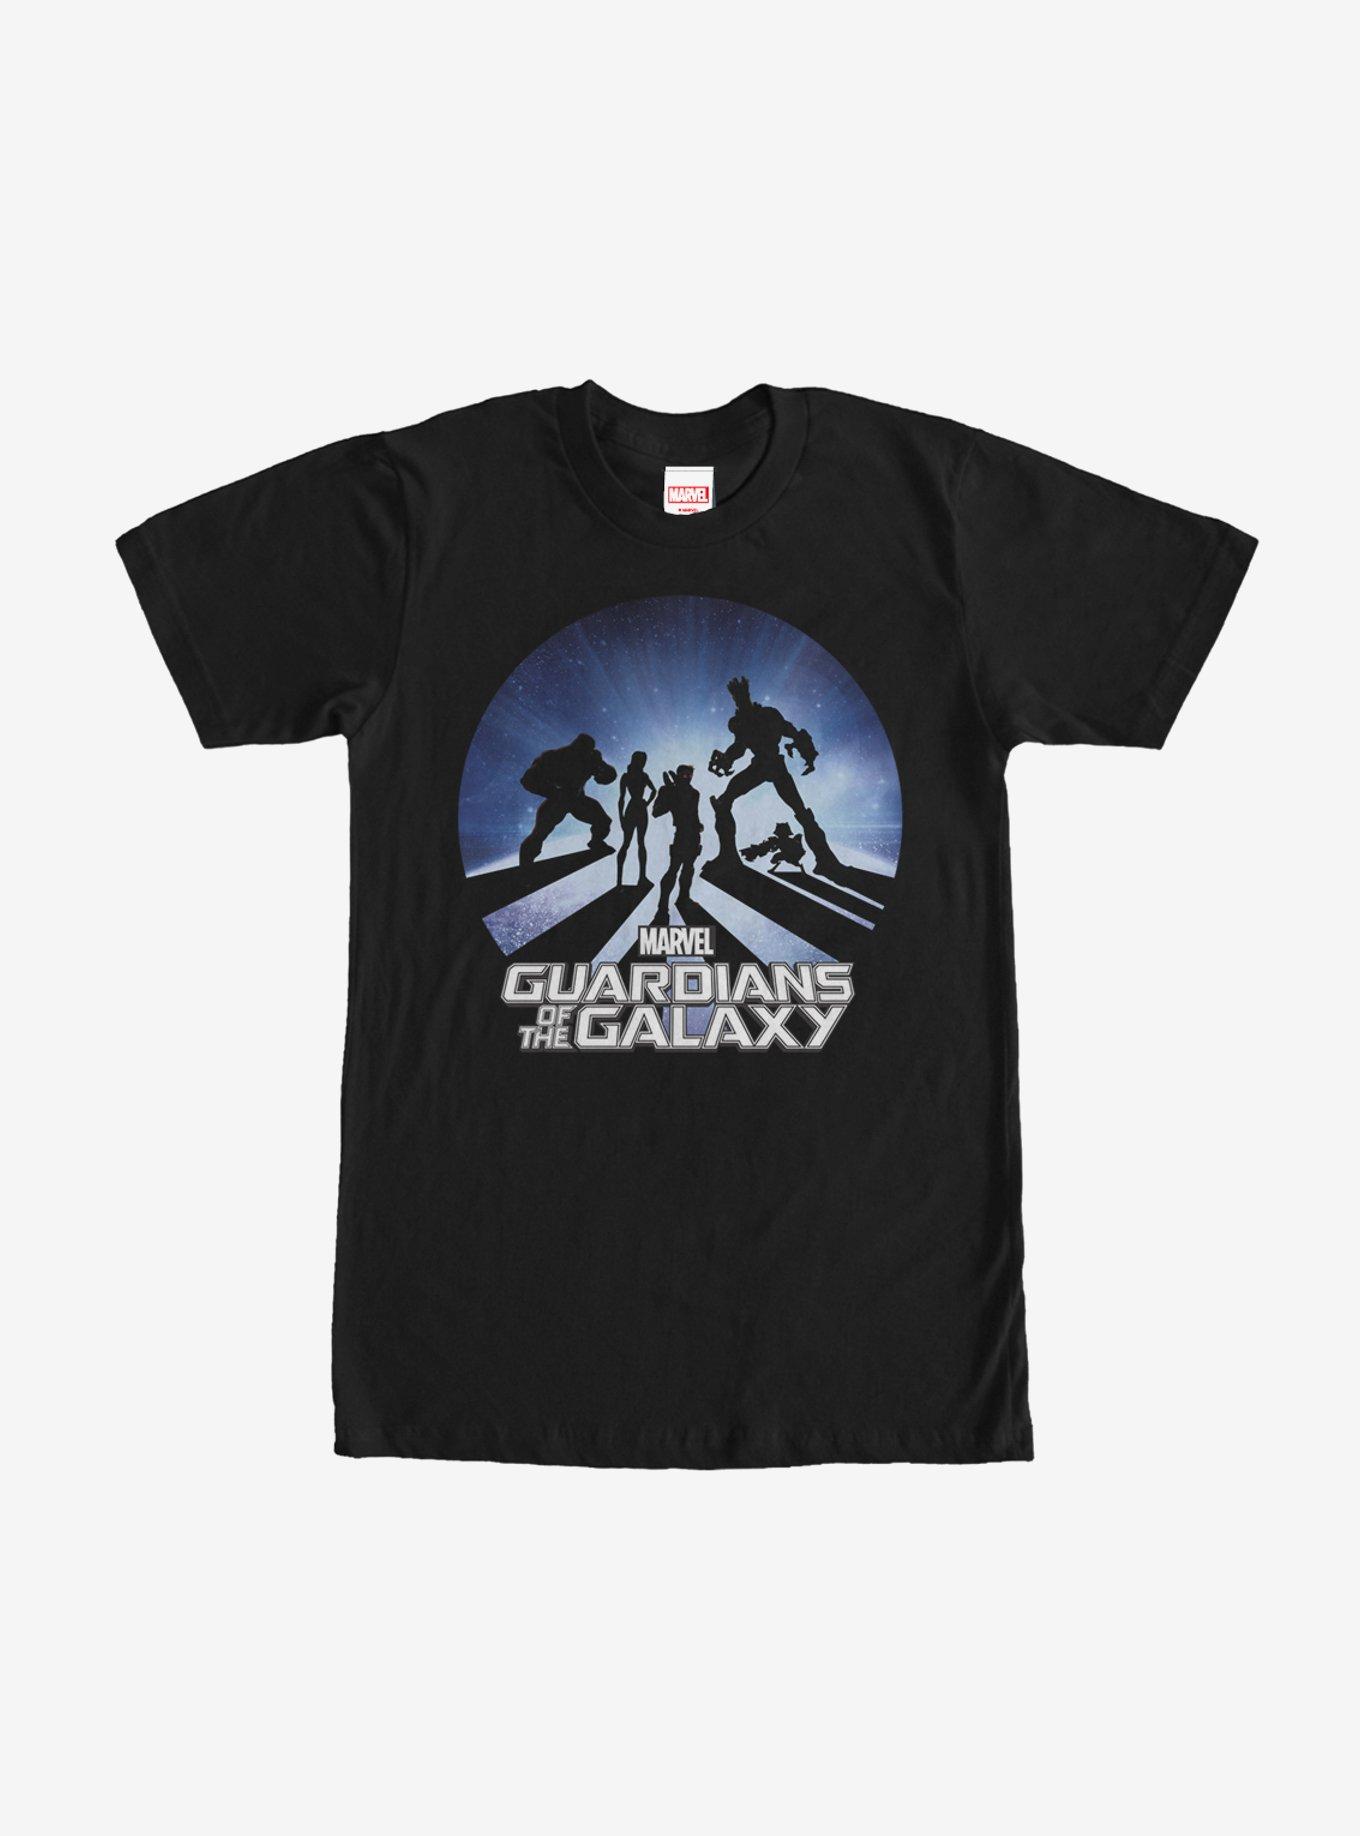 Marvel Guardians of the Galaxy Silhouette T-Shirt, BLACK, hi-res